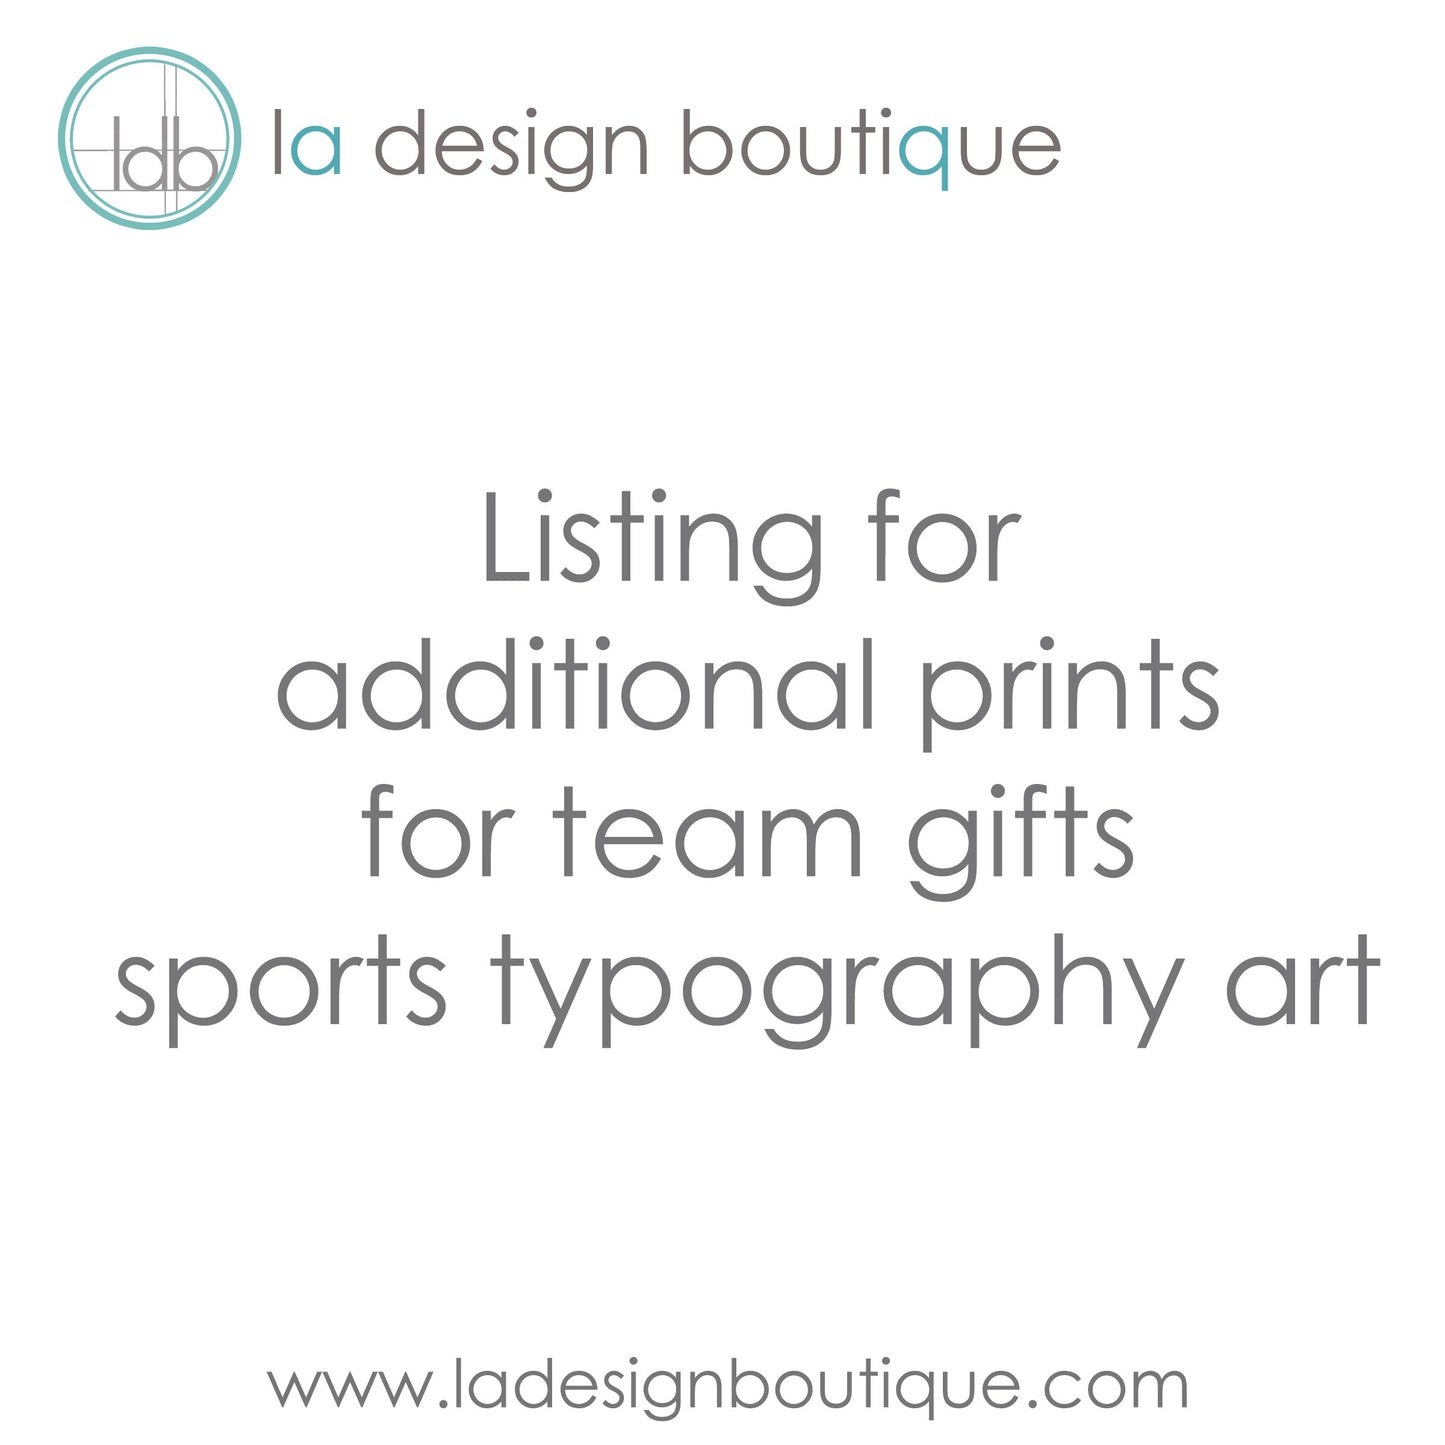 Personalized Sports Typography Art - Additional Prints for Team Gift